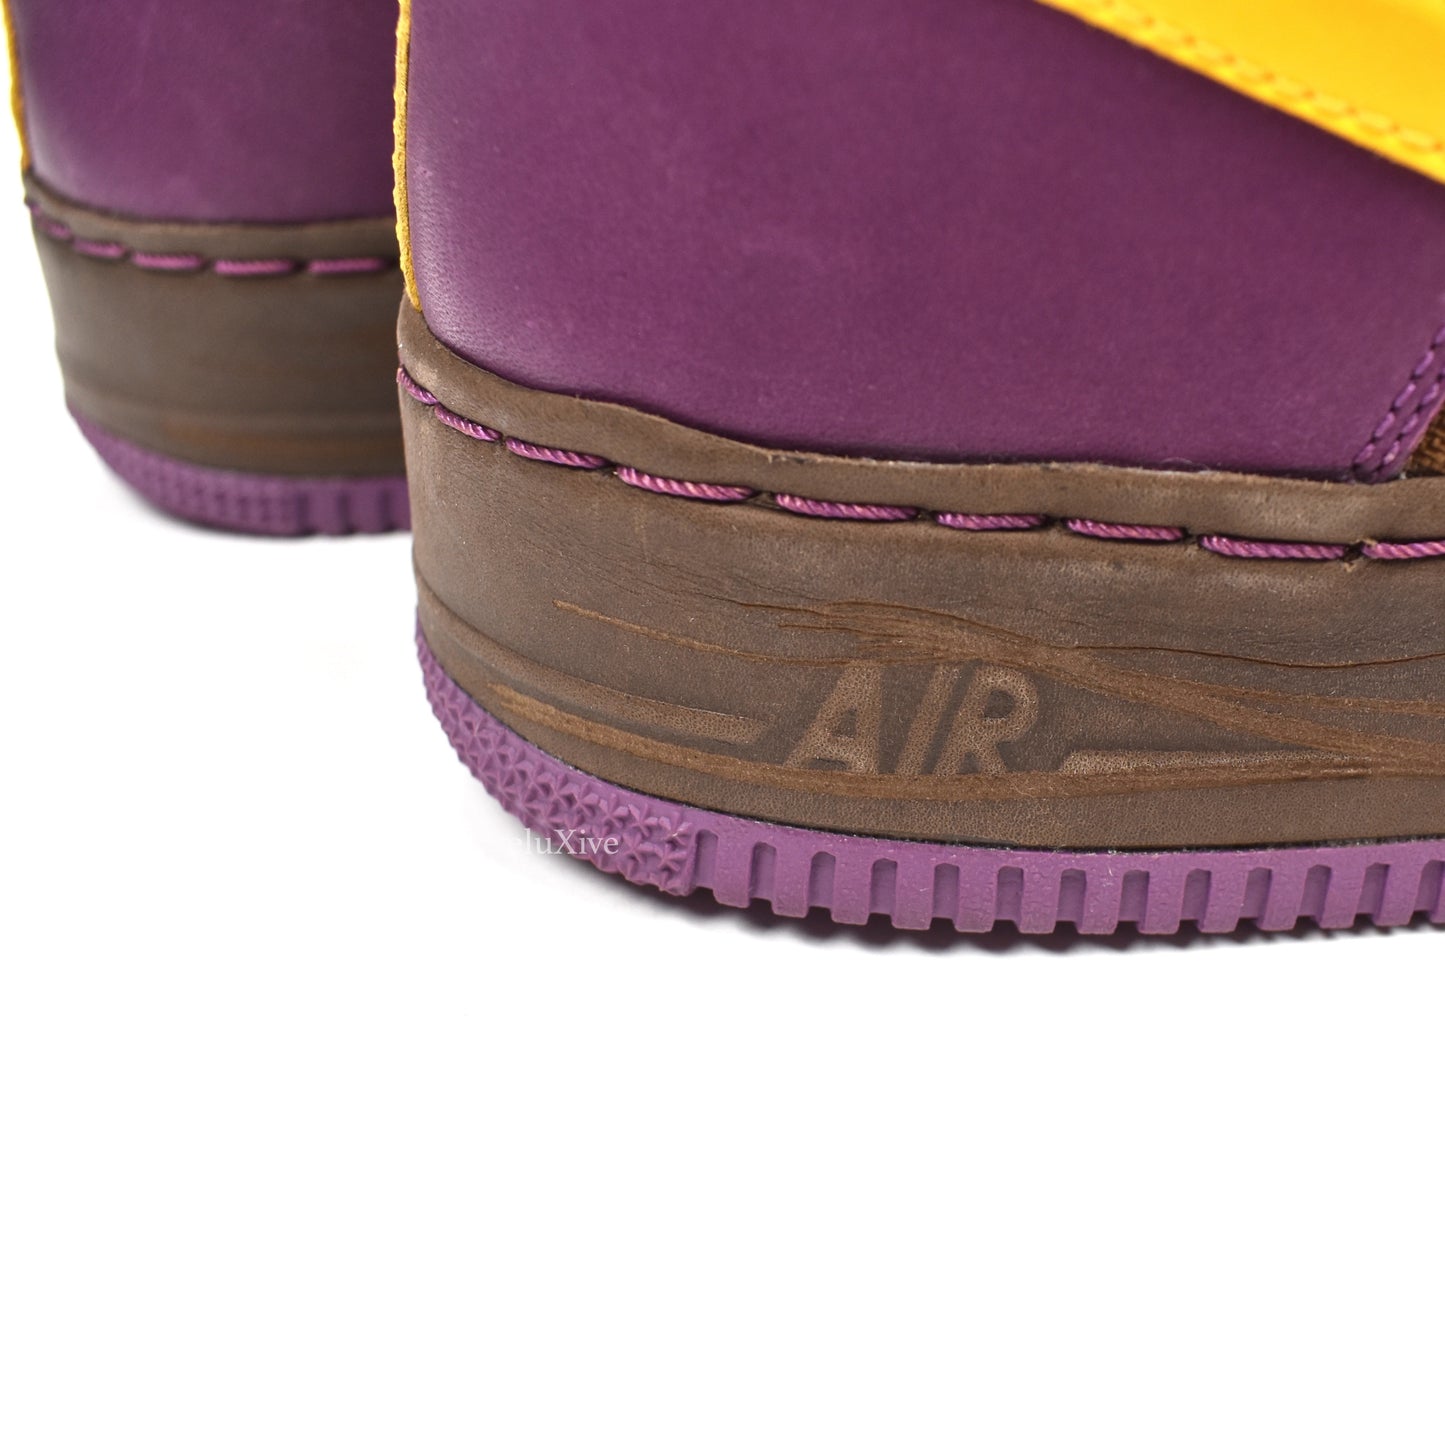 Nike - Air Force 1 Low Inside Out (Bison/Purple)